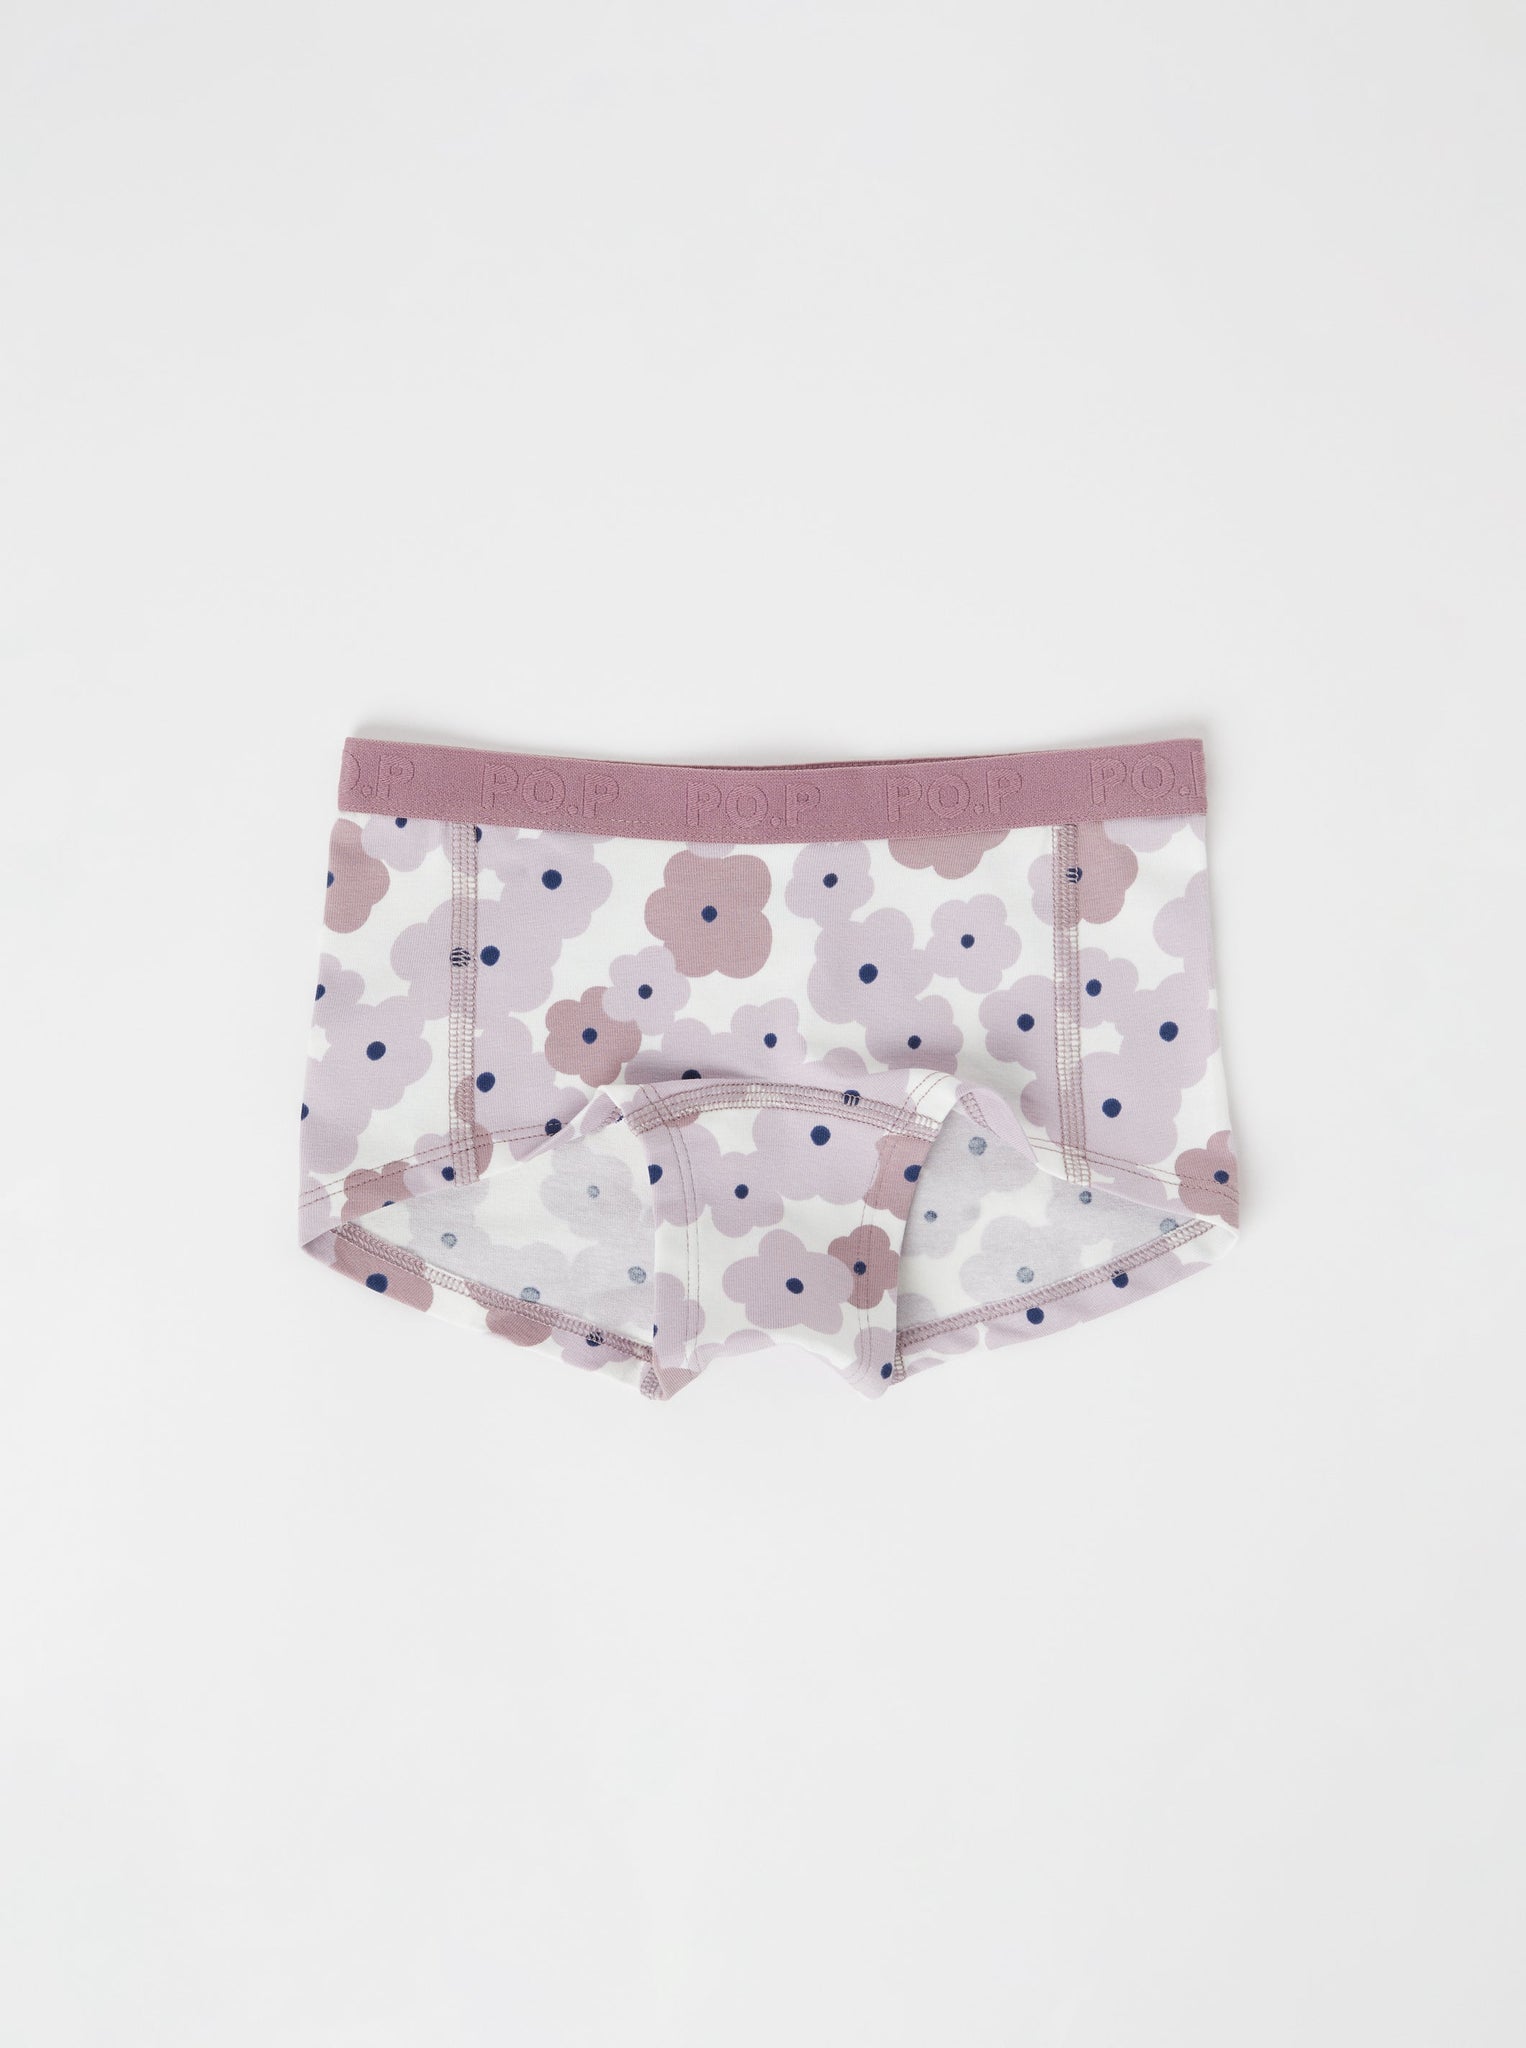 Organic Cotton Girls Boxer Briefs from the Polarn O. Pyret kidswear collection. Clothes made using sustainably sourced materials.